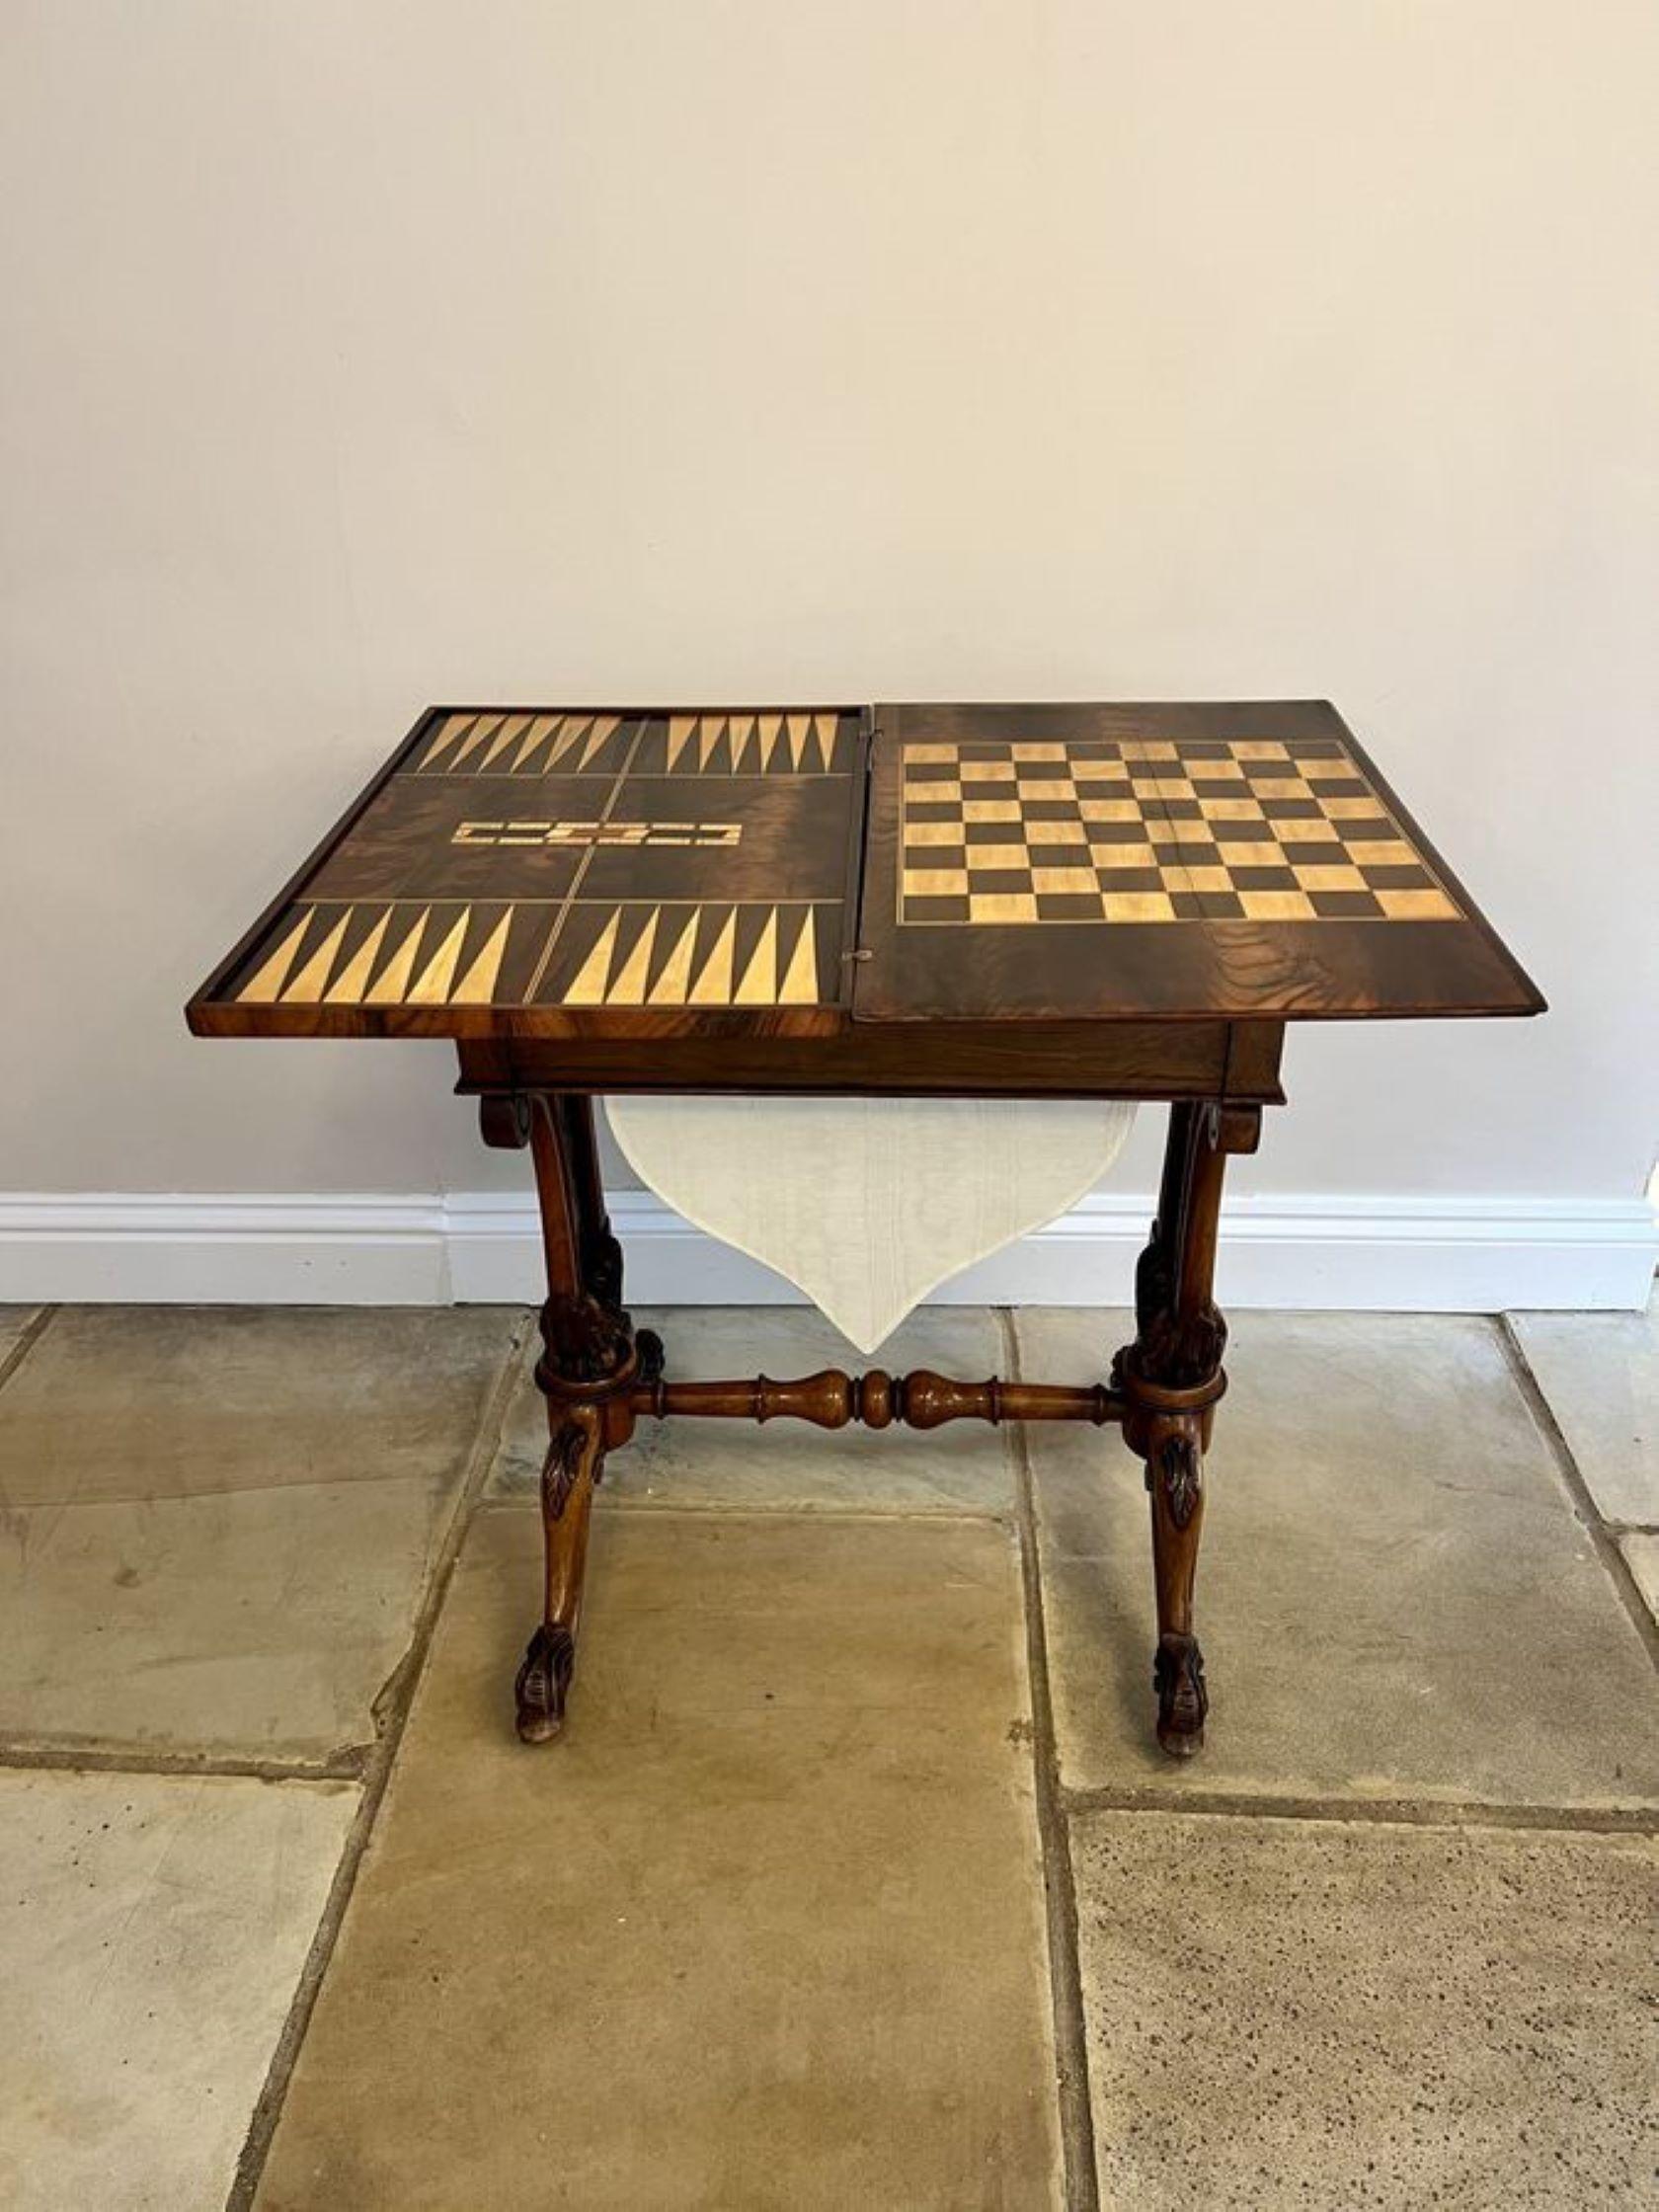 Outstanding quality antique Victorian burr walnut inlaid floral marquetry games table, having a outstanding quality burr walnut inlaid floral marquetry swizzle top opening to reveal a inlaid chessboard and backgammon board above a fitted drawer and